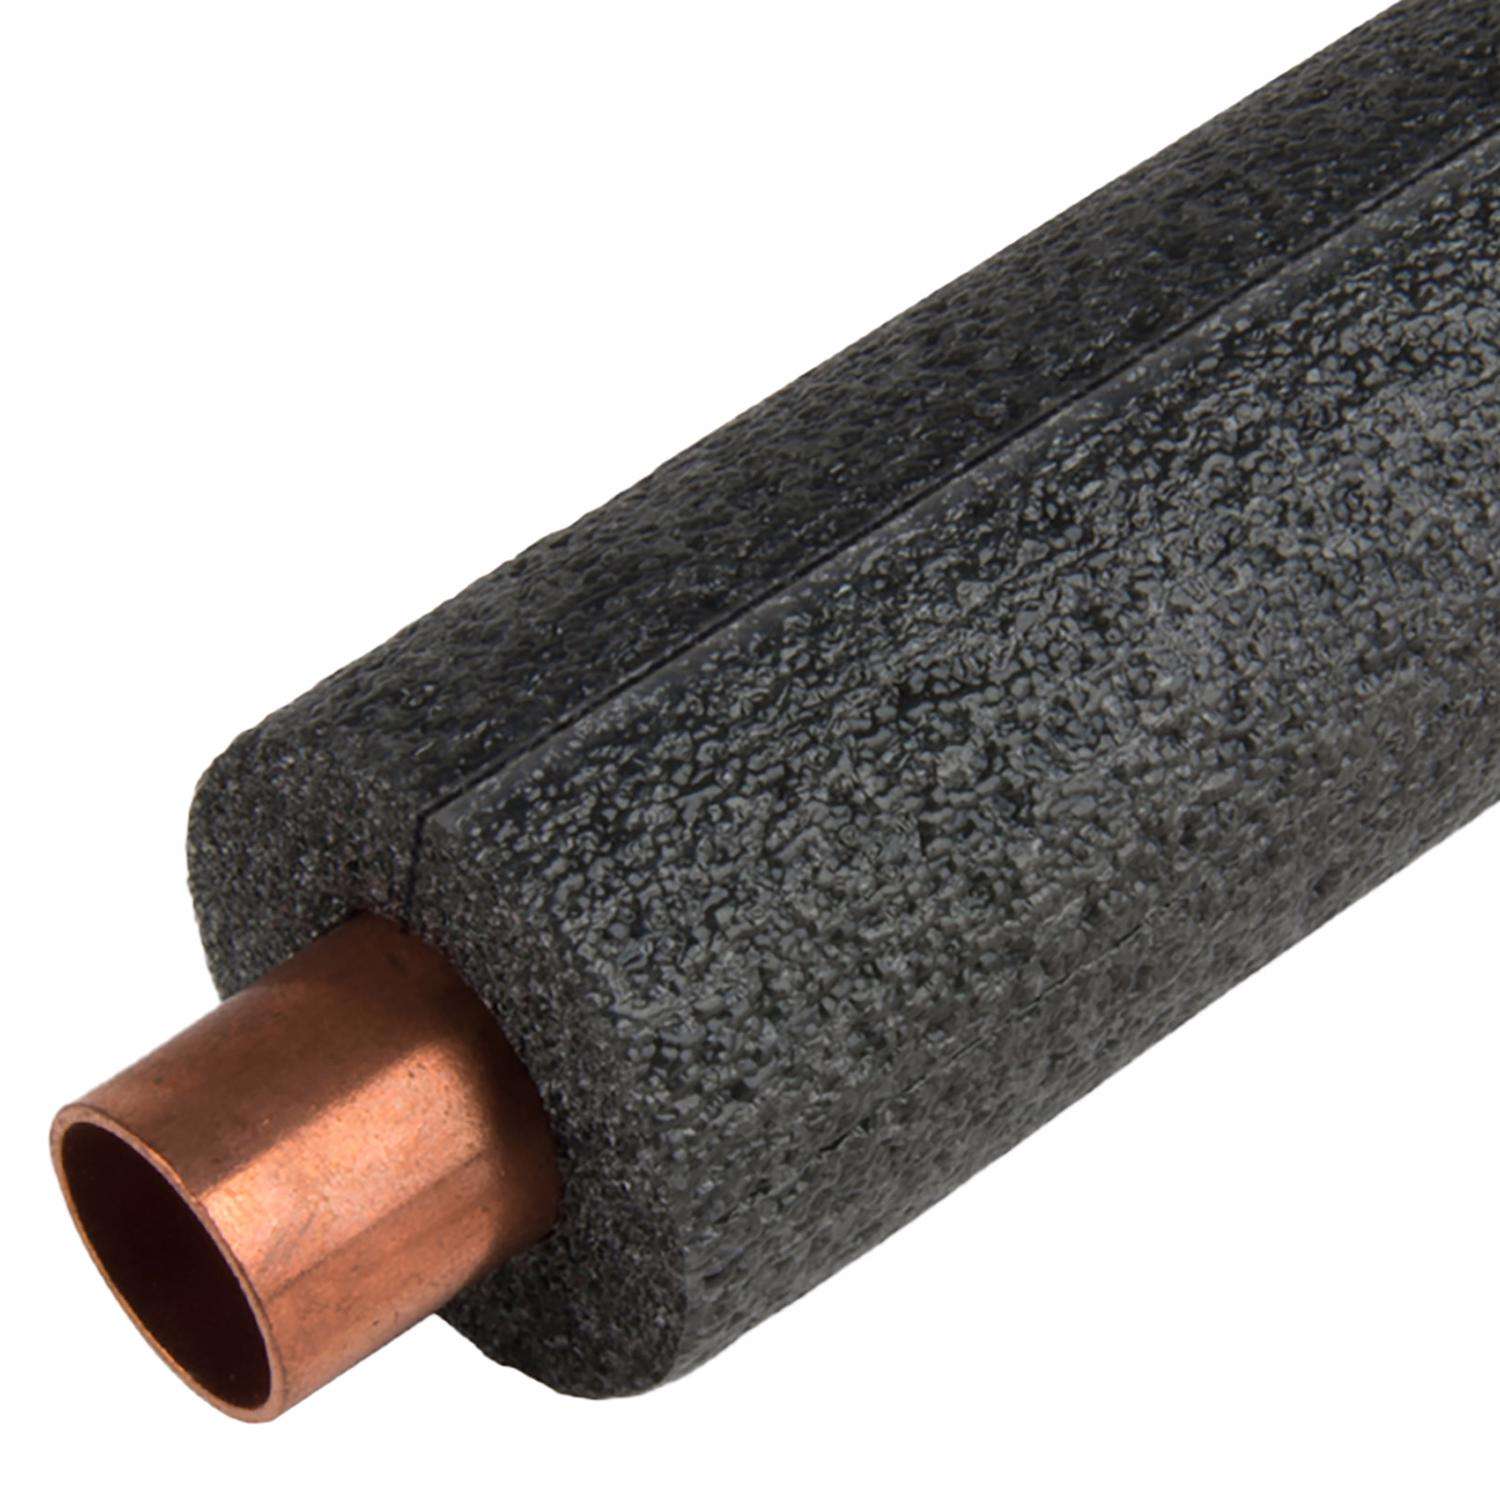 1/2 x 2 Rubber Pipe Insulation 30 Lineal Feet/Carton 